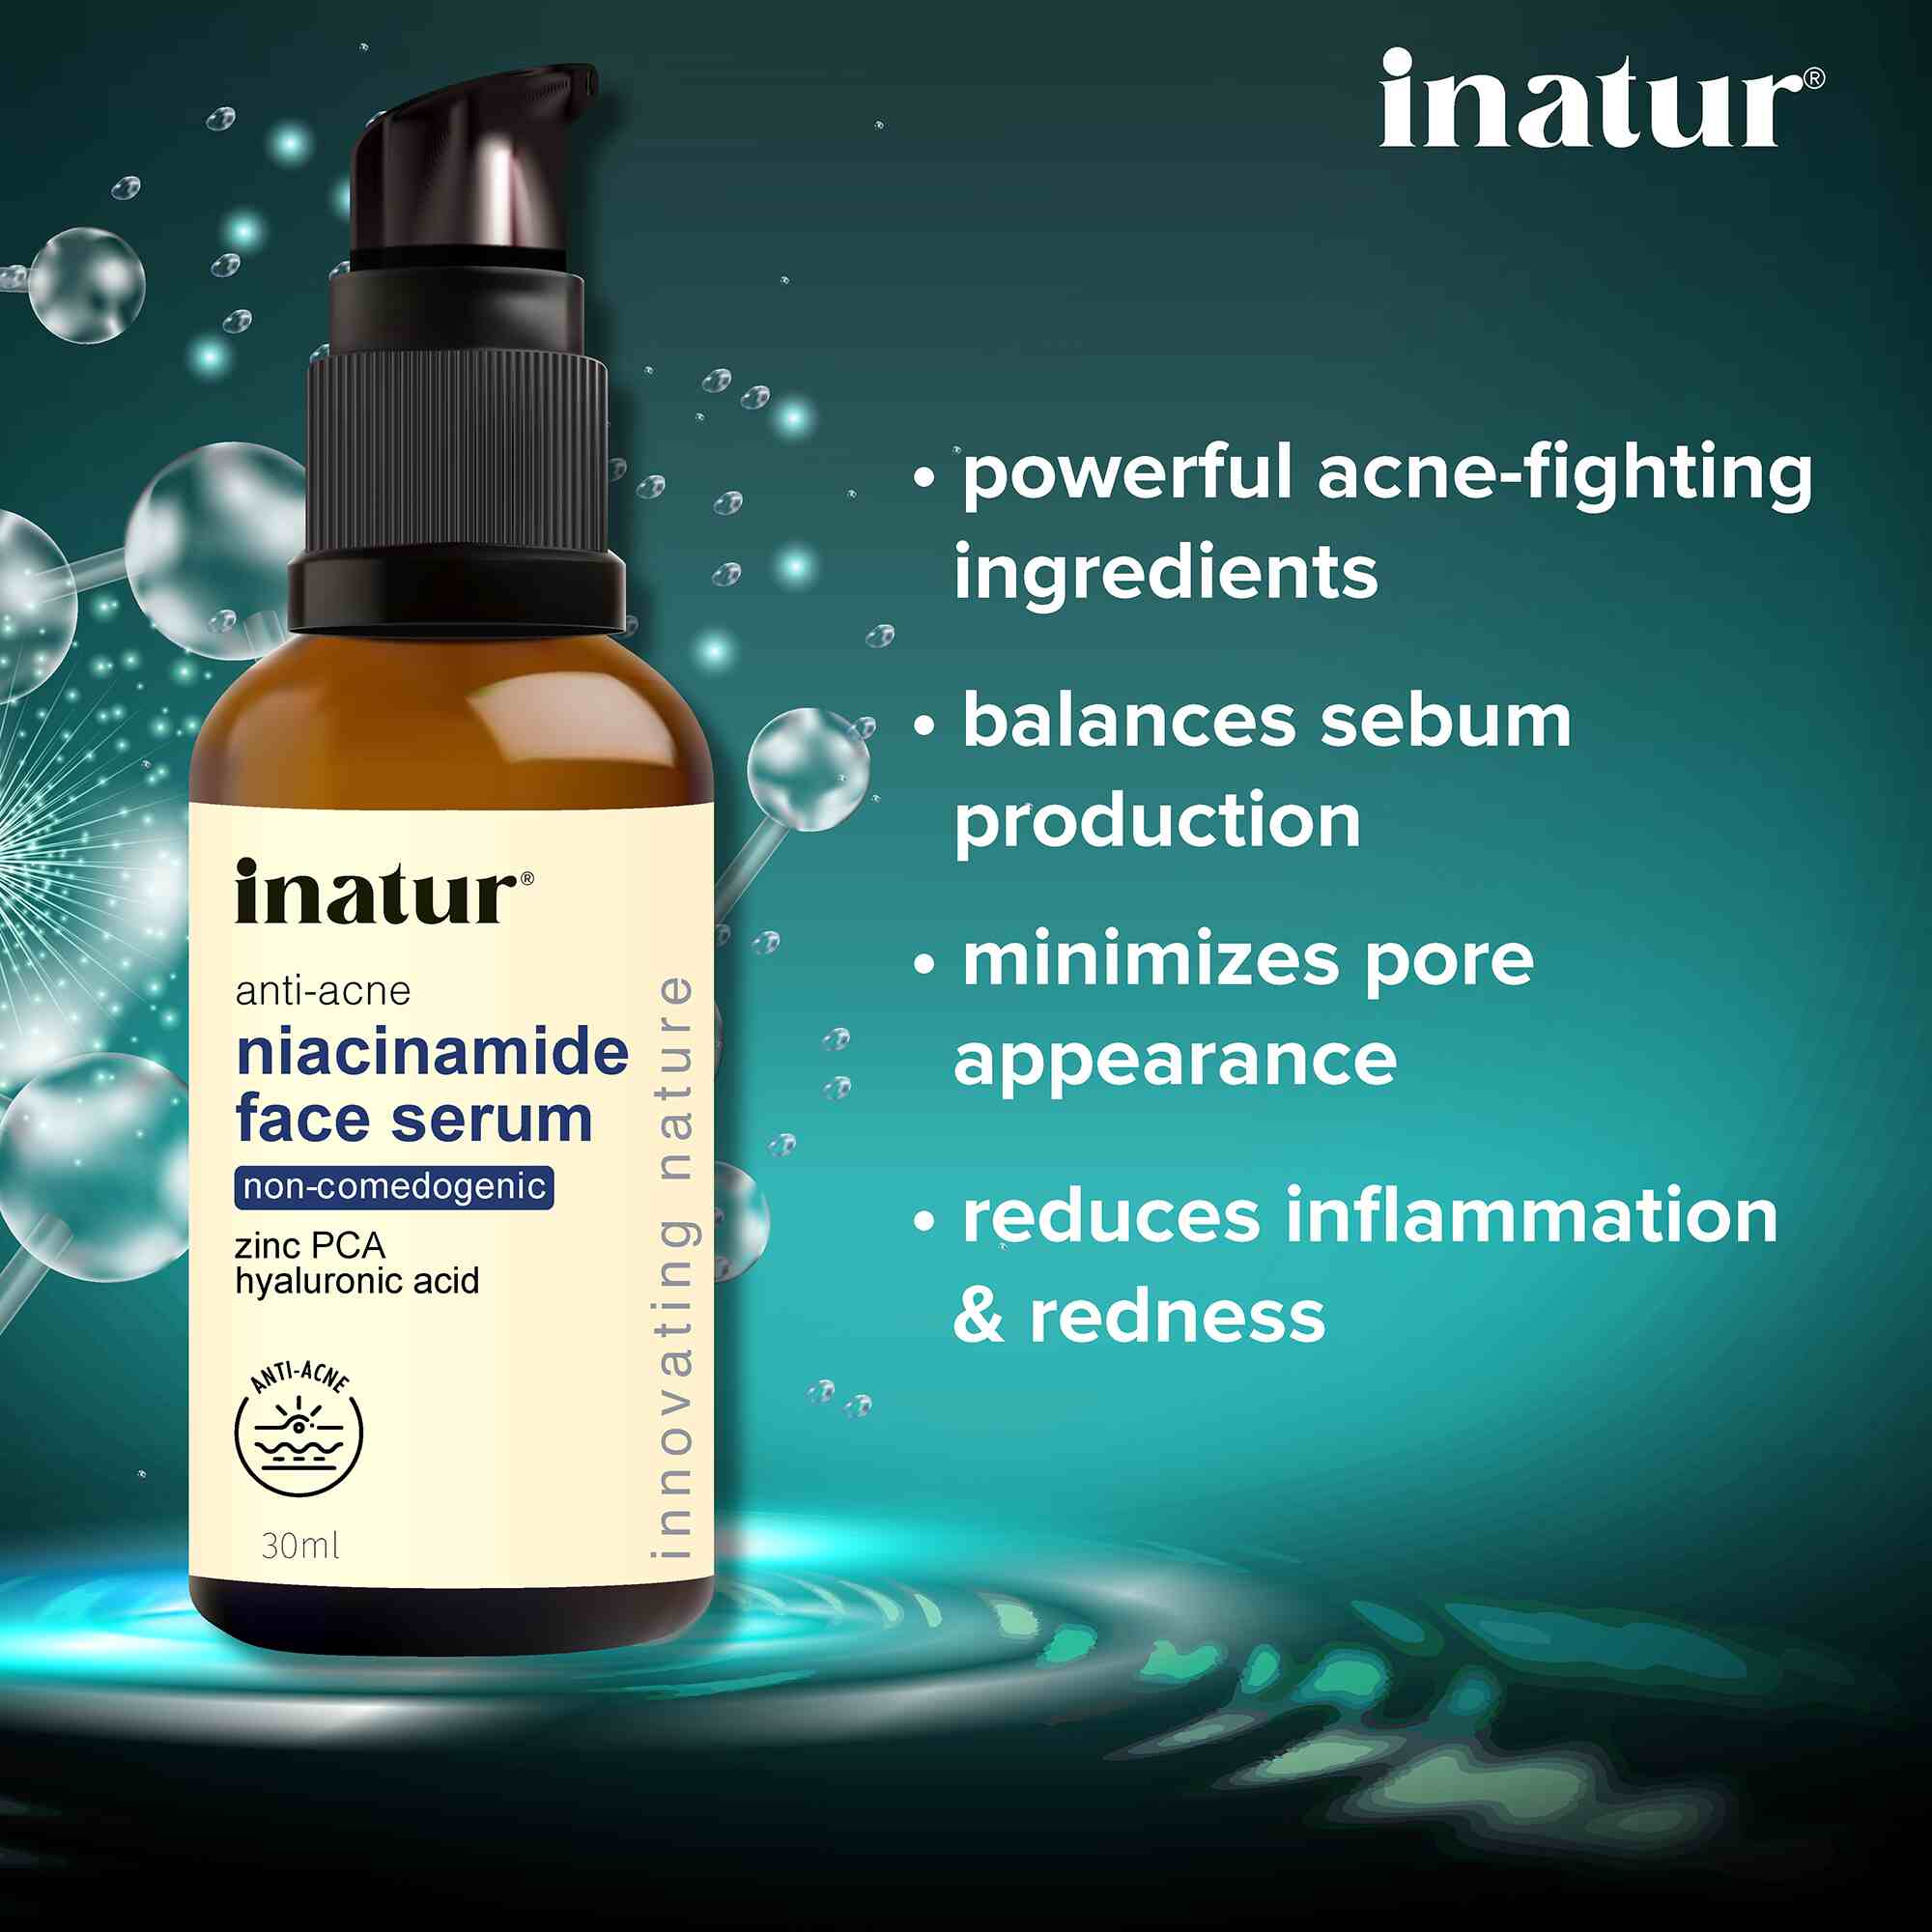 why inatur niacinamide face serum